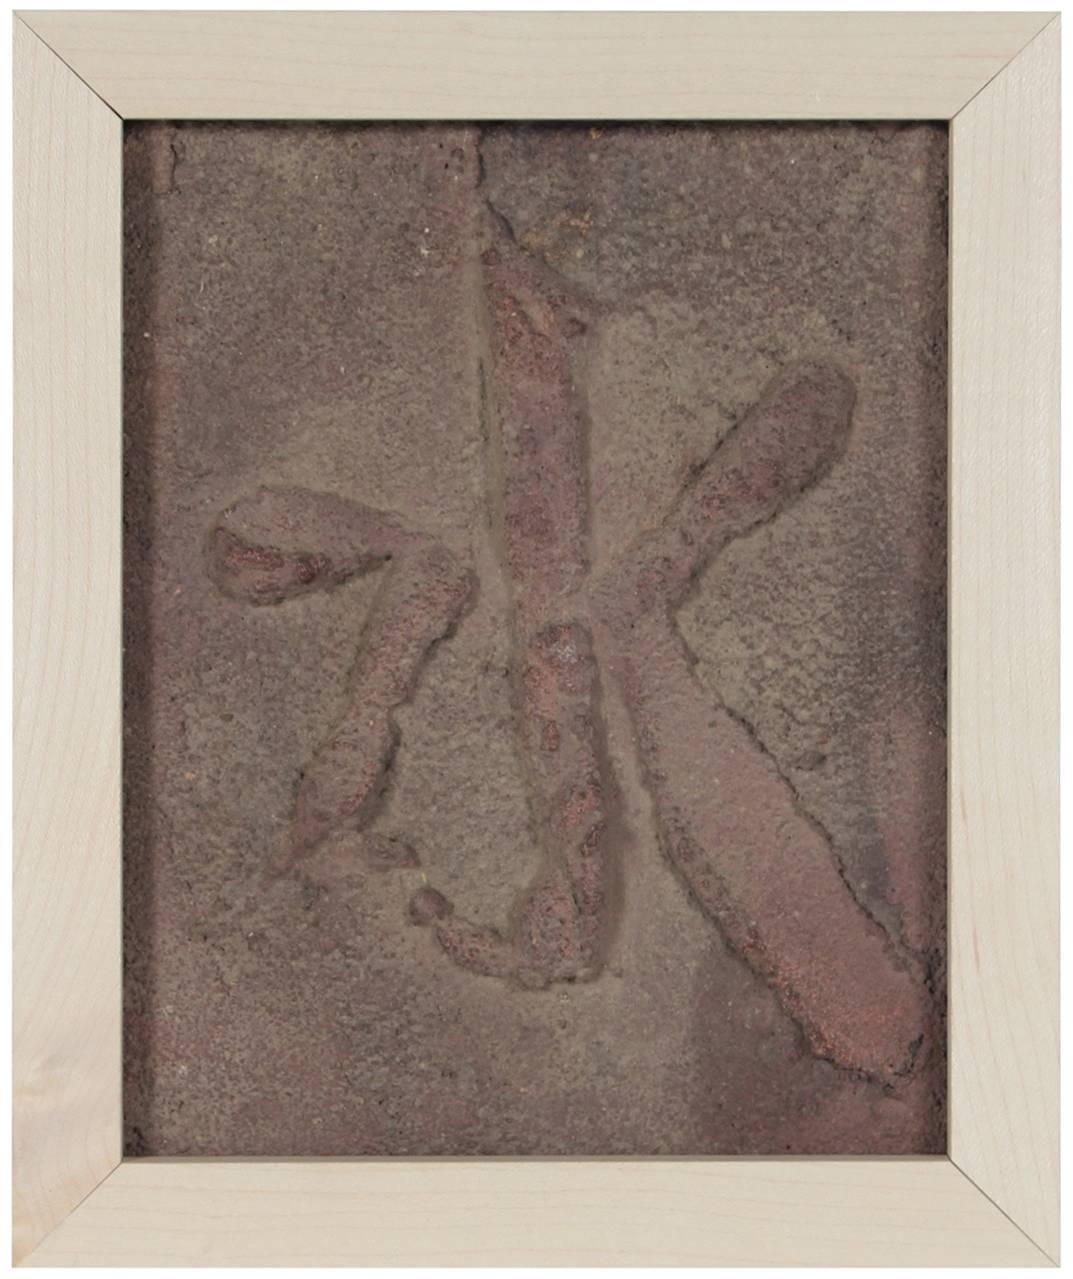 Hugh Wiley Abstract Sculpture – "Water" Cement Relief Sculpture, Late 20th Century